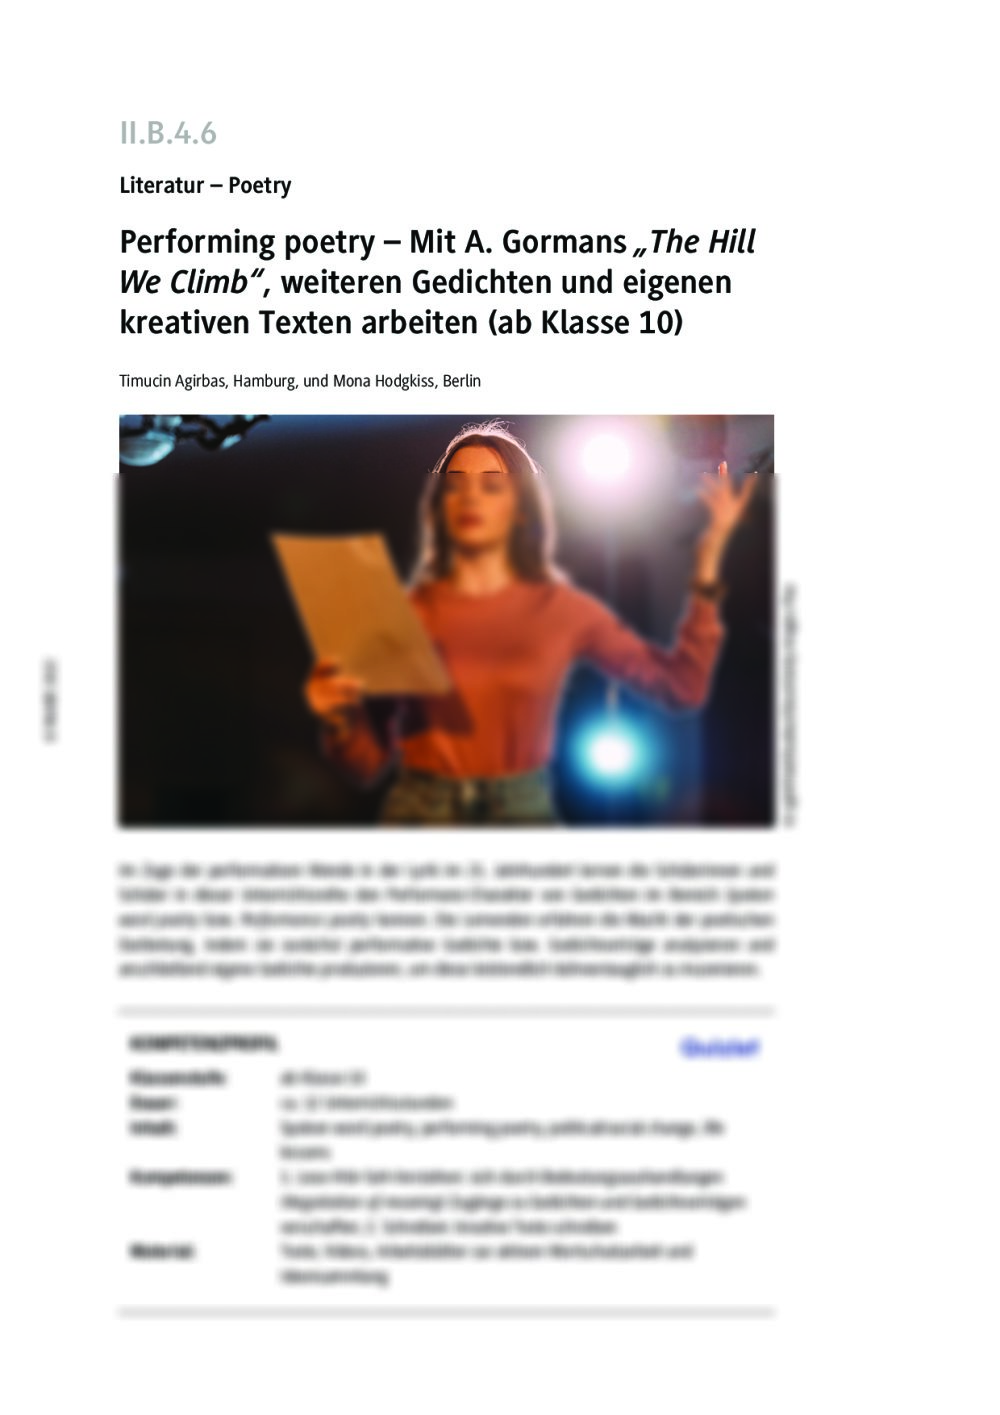 Performing poetry - Seite 1